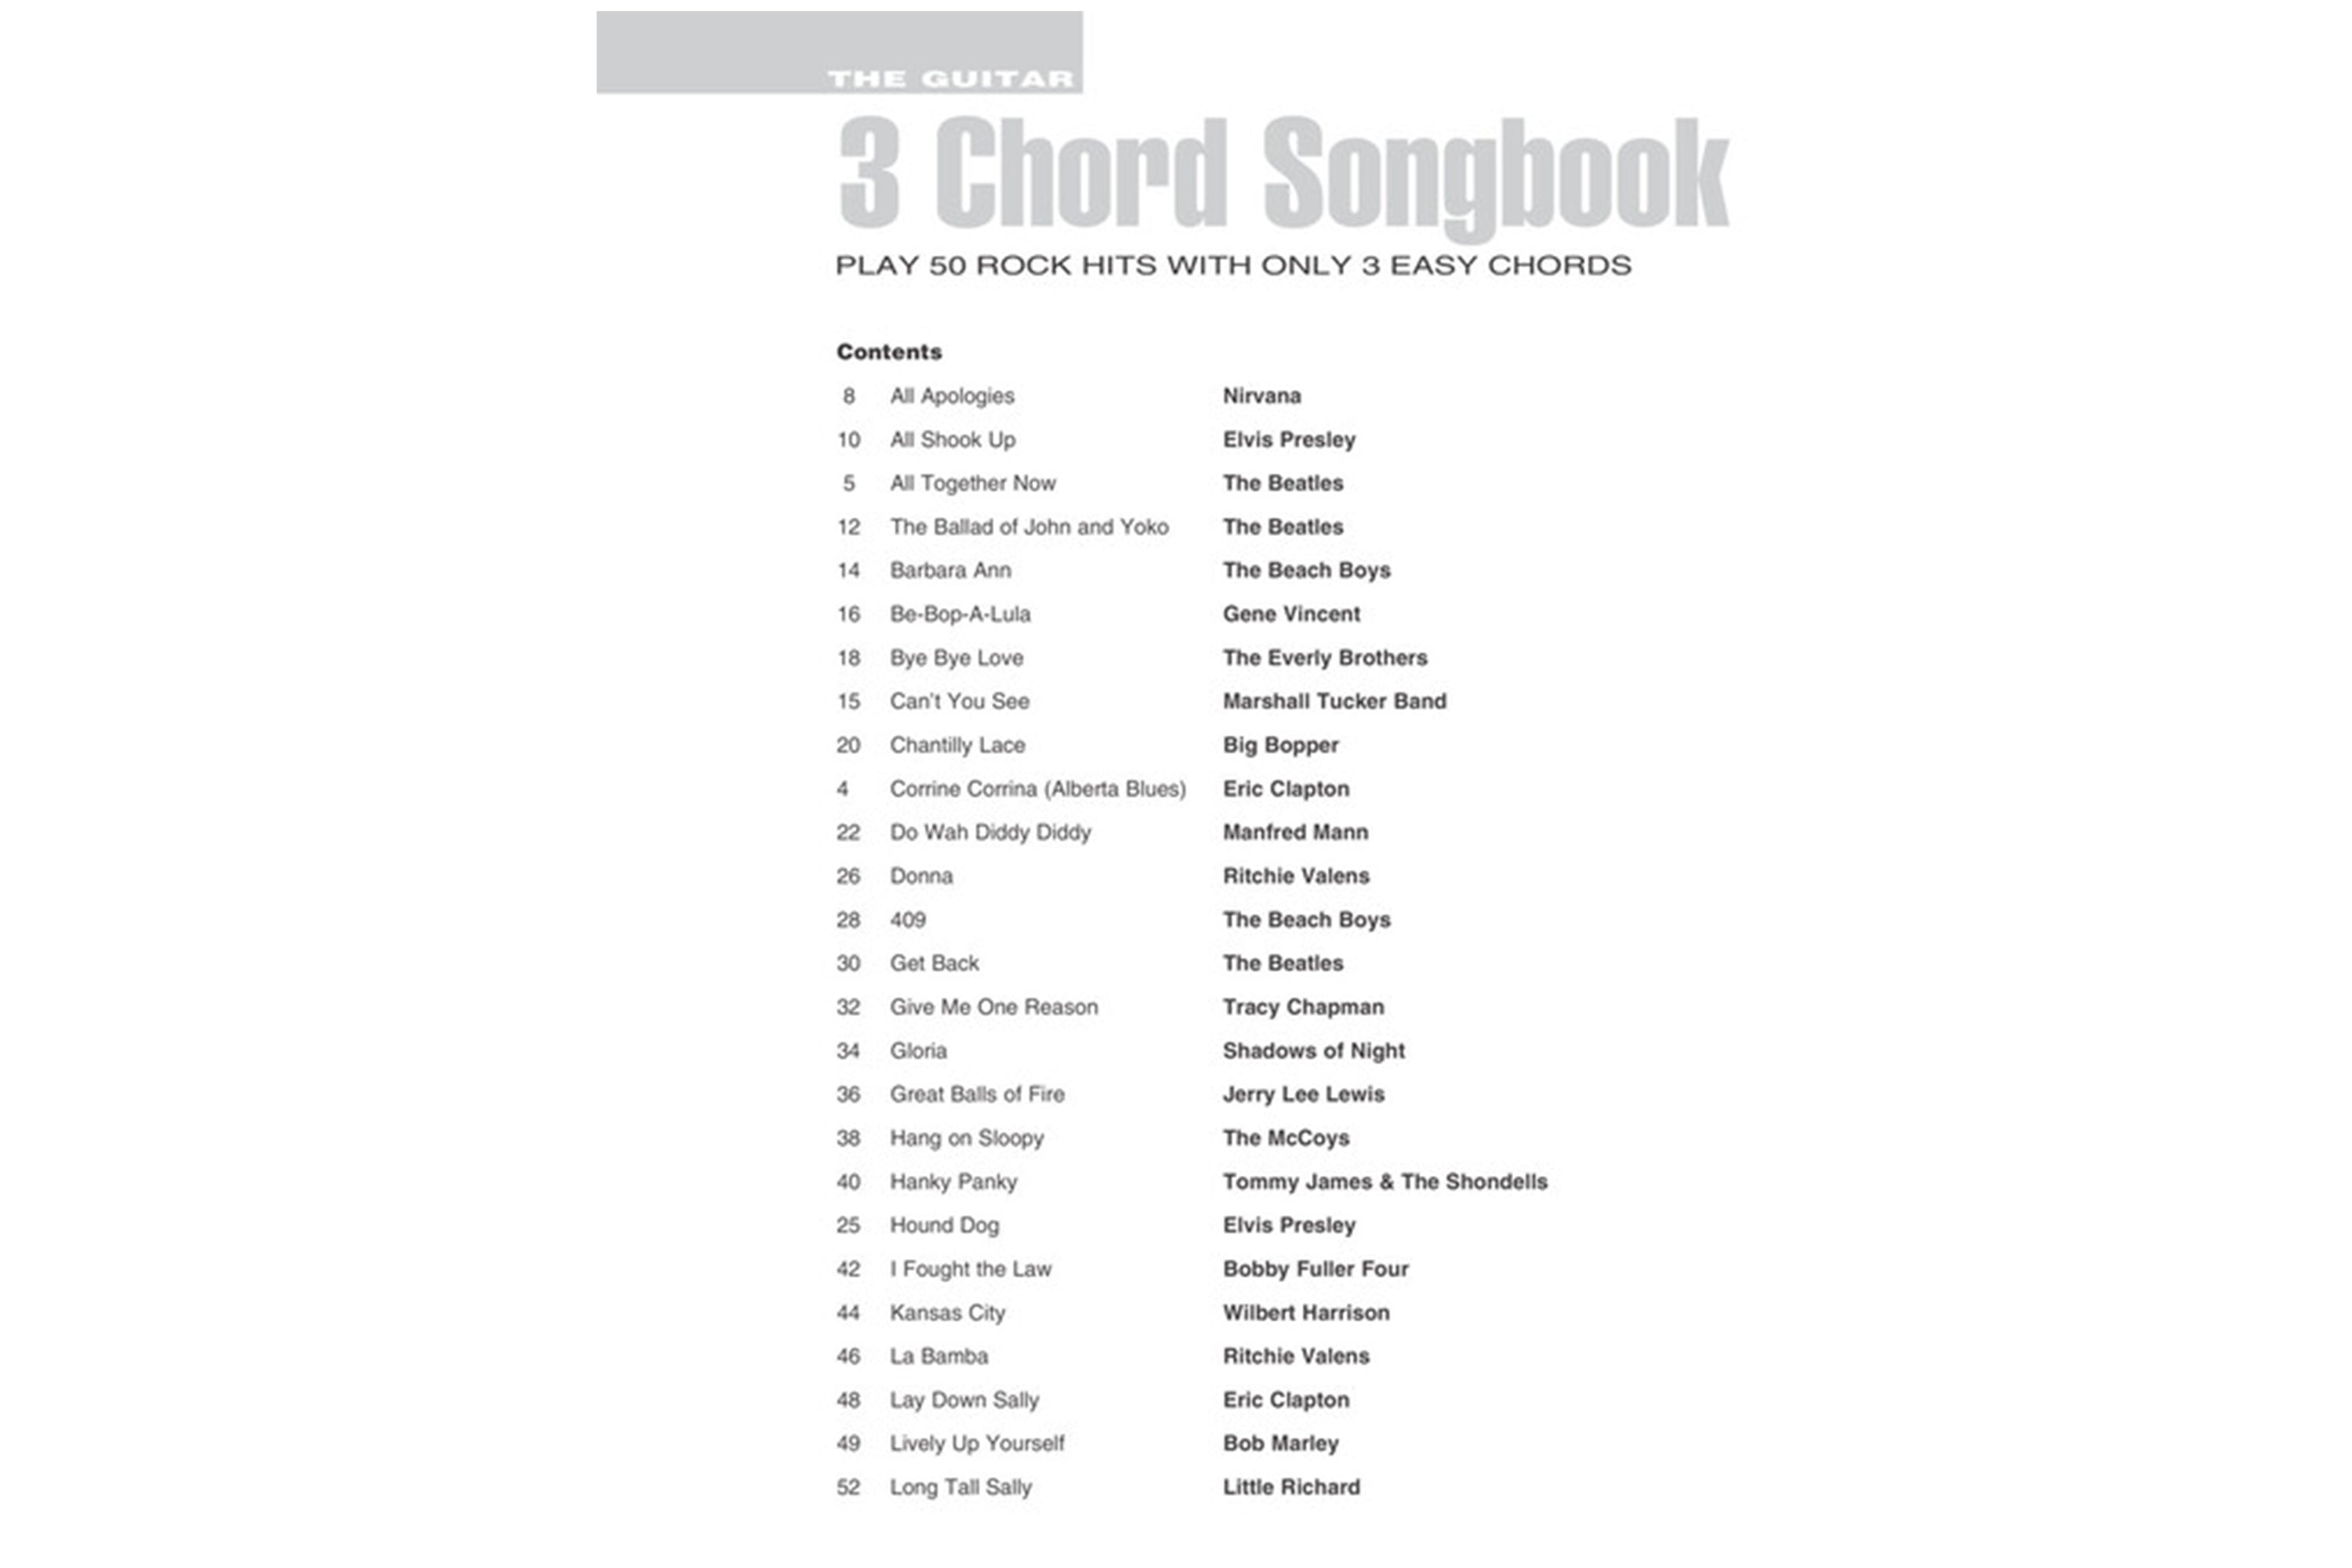 The Guitar Three-Chord Songbook Play 50 Rock Hits with Only 3 Easy Chords